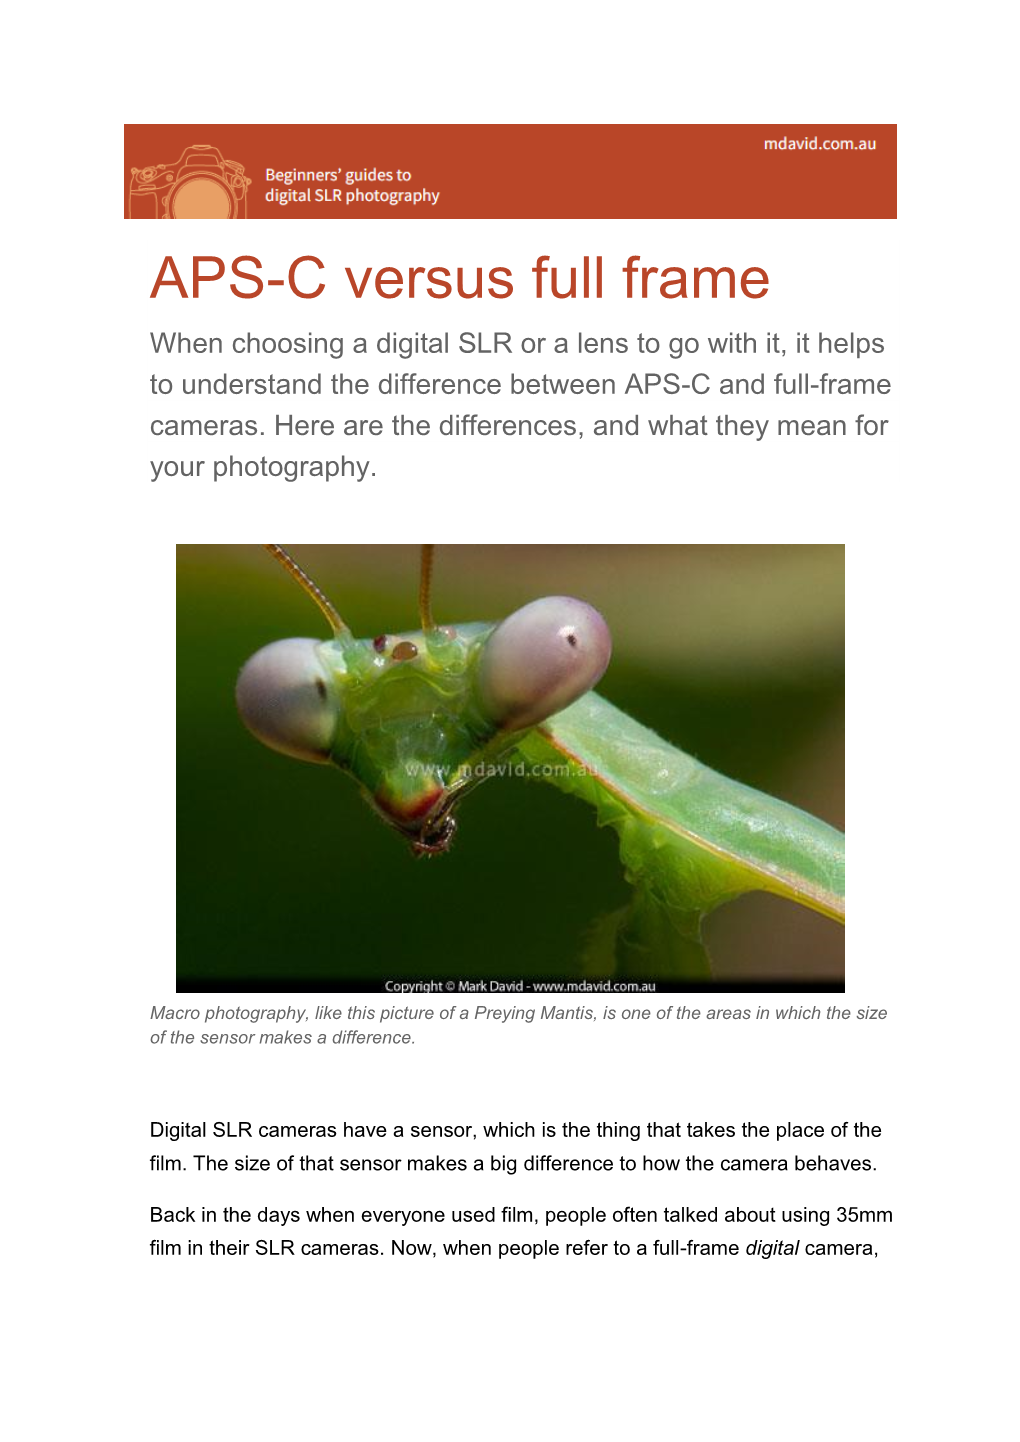 APS-C Versus Full Frame When Choosing a Digital SLR Or a Lens to Go with It, It Helps to Understand the Difference Between APS-C and Full-Frame Cameras